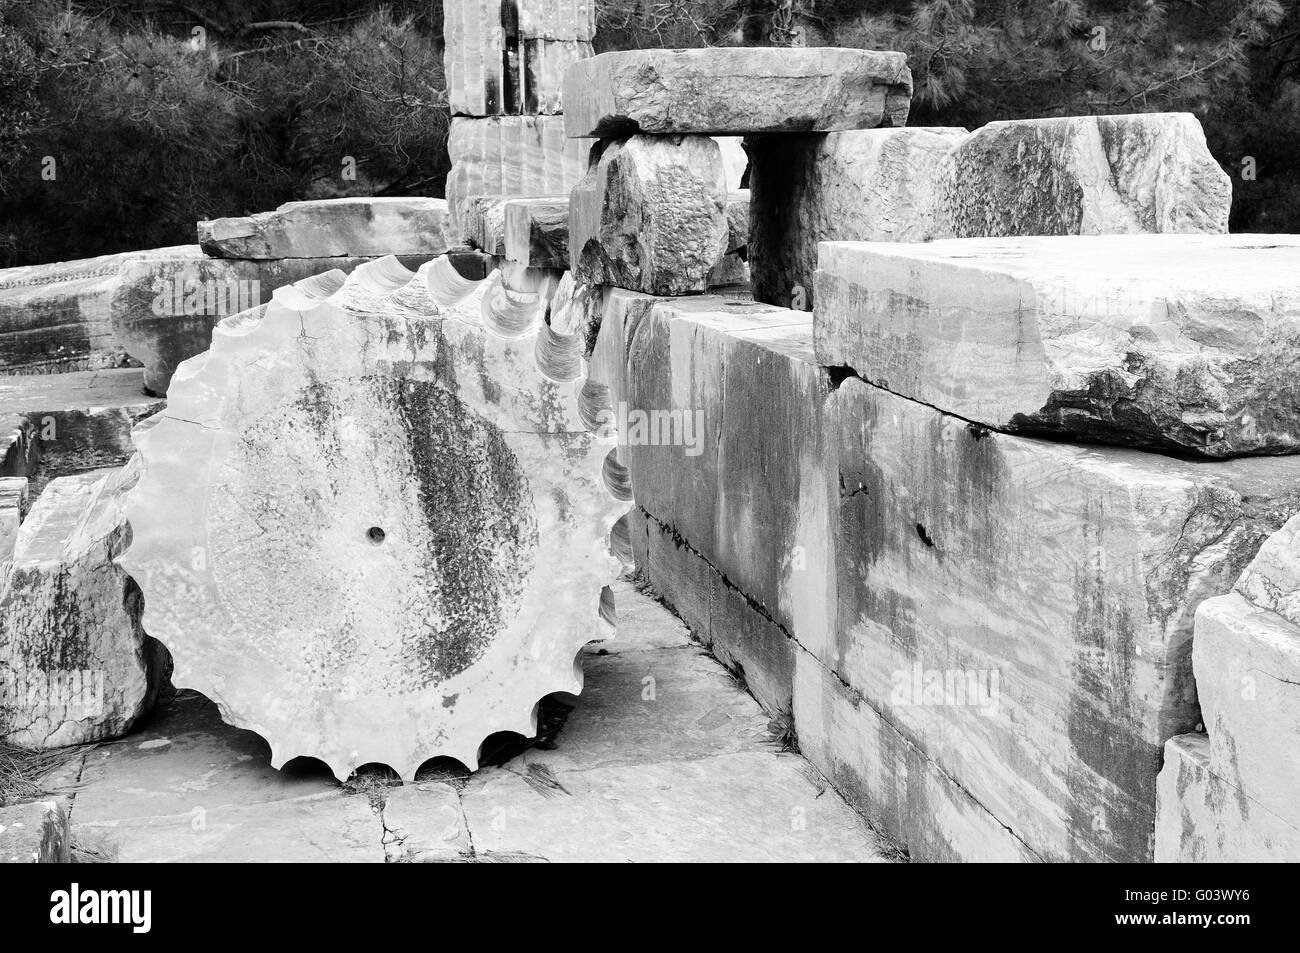 Remains of the ancient world in black and white Stock Photo